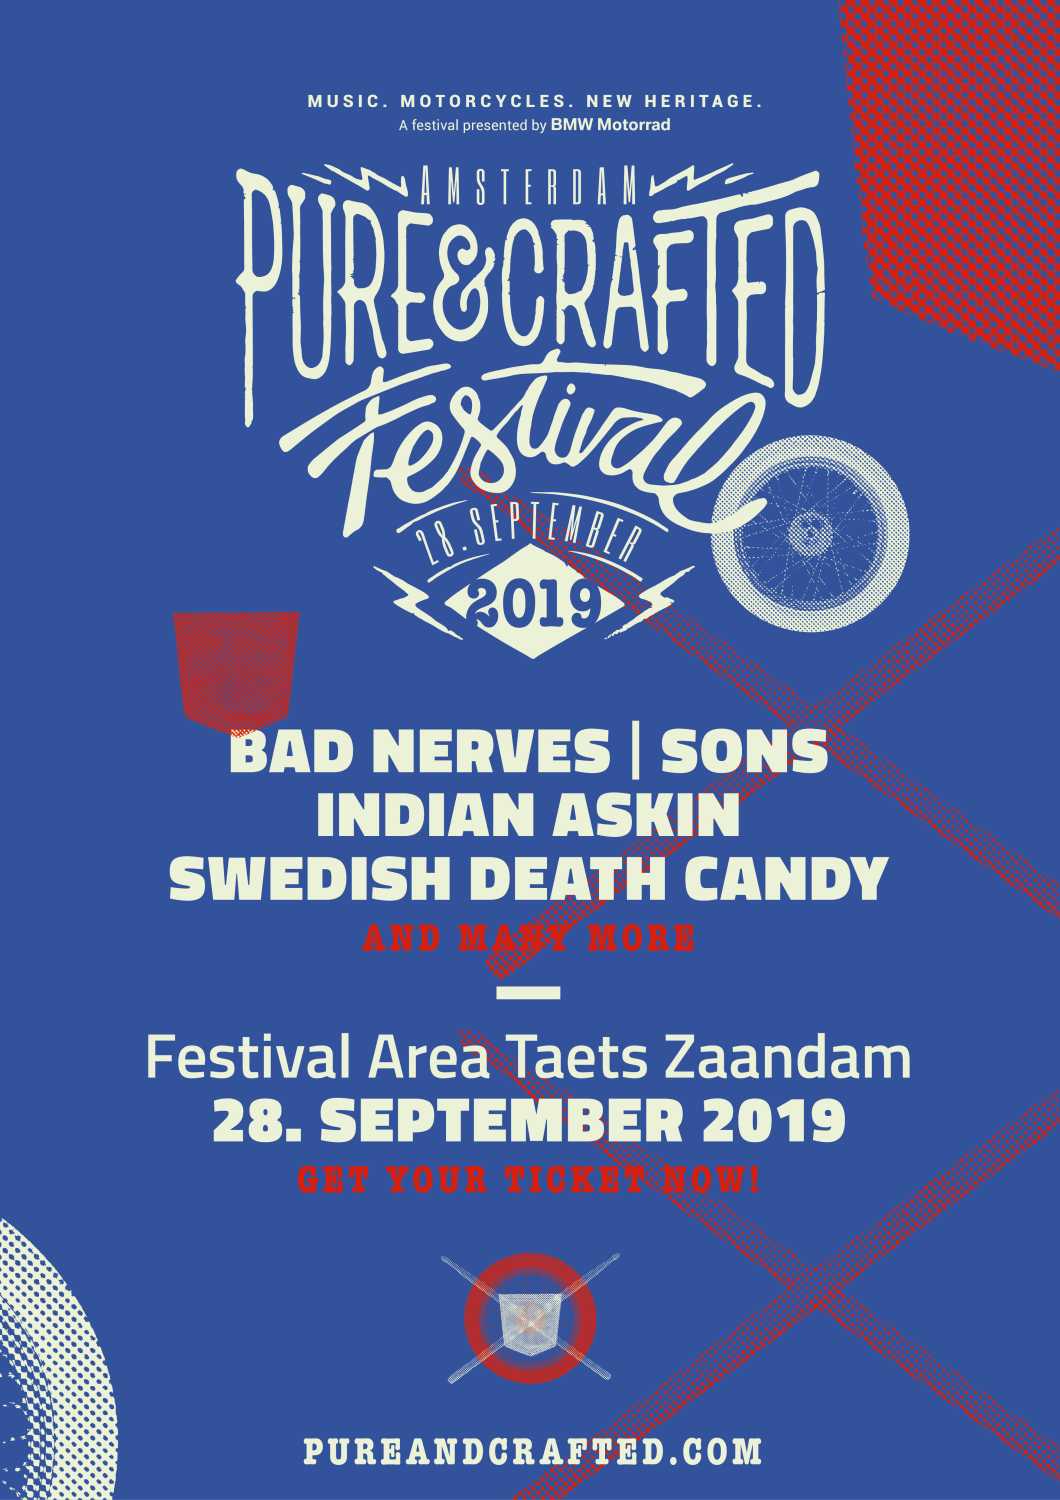 Pure&Crafted Festival 2019 presented by BMW Motorrad. (07/2019)